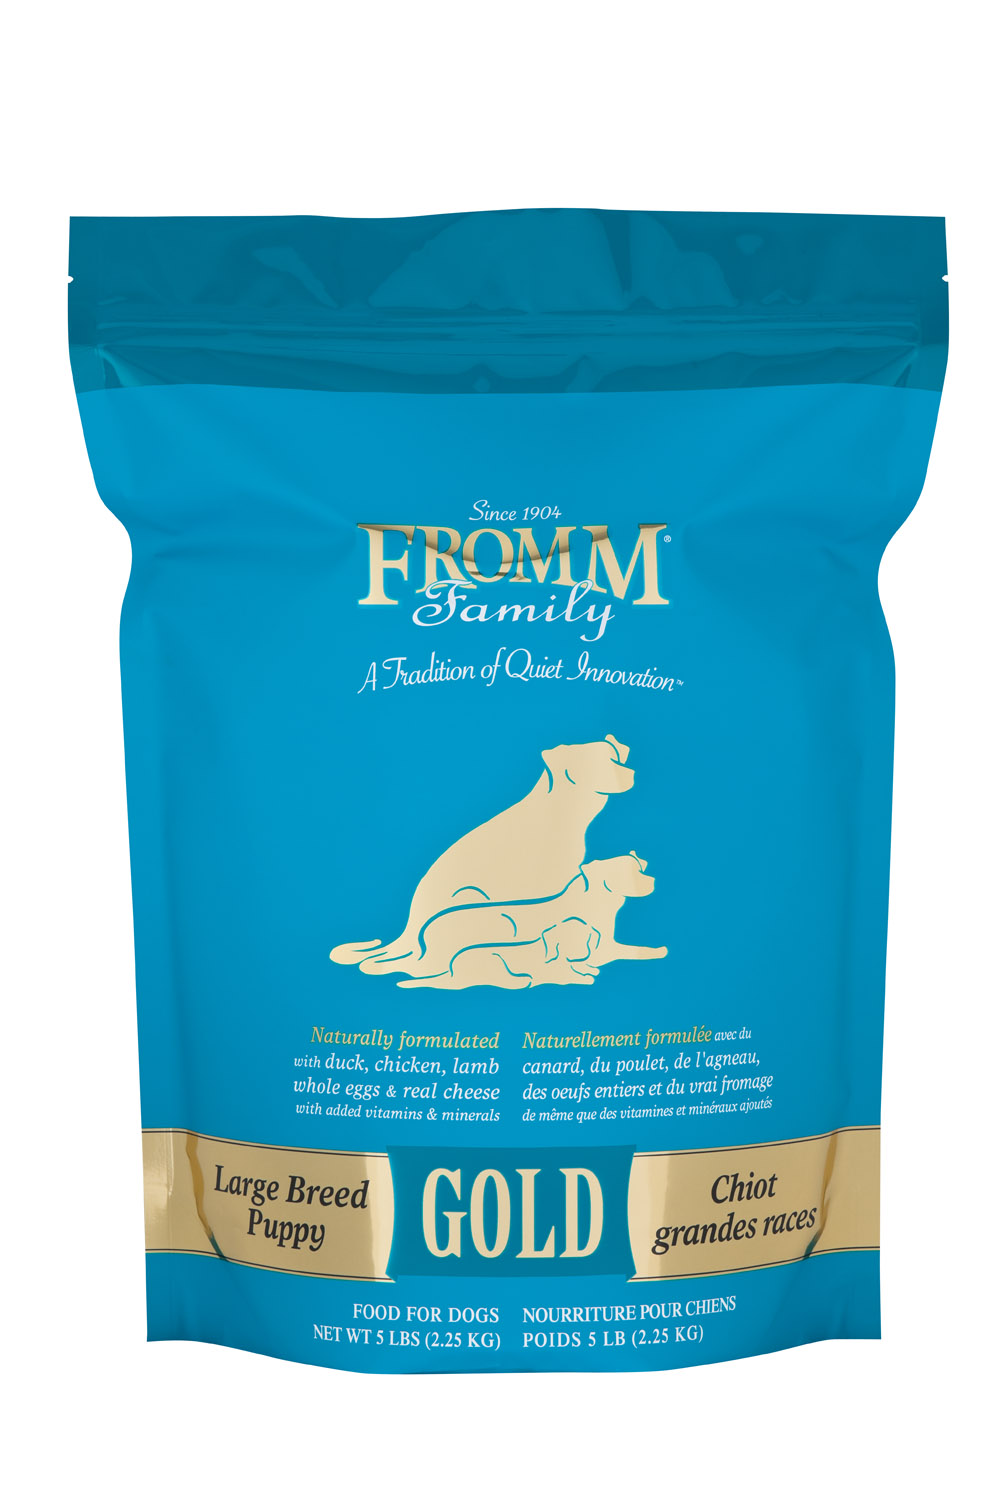 Fromm Family Large Breed Puppy Gold Food for Dogs, 5 lbs